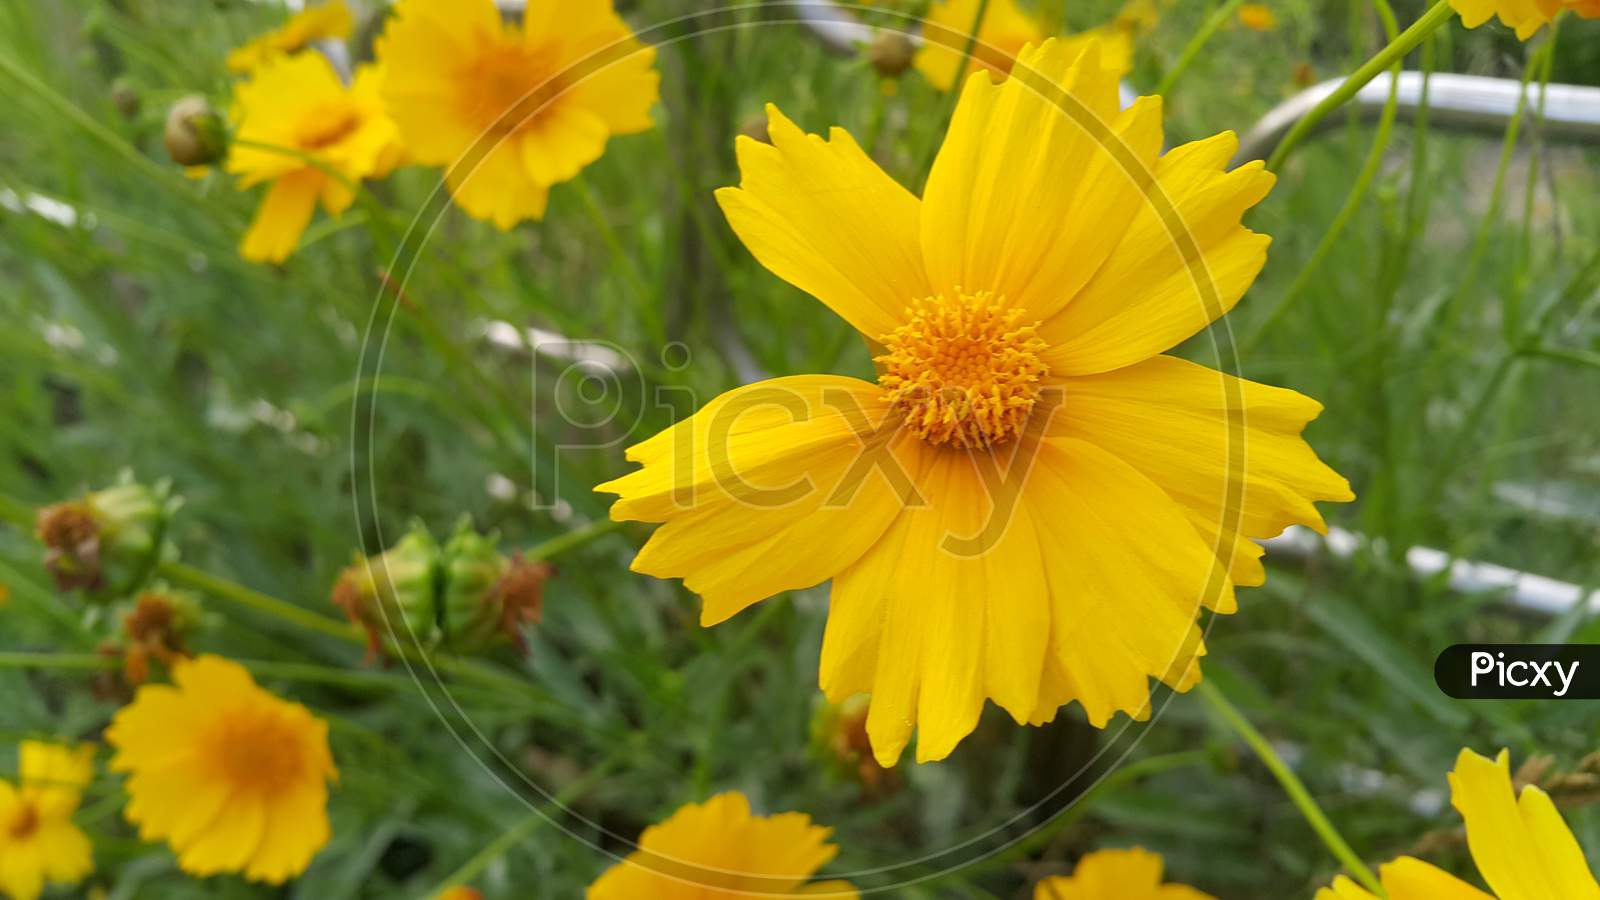 Closeup View Of Lovely Yellow Flower Against A Green Leaves Background